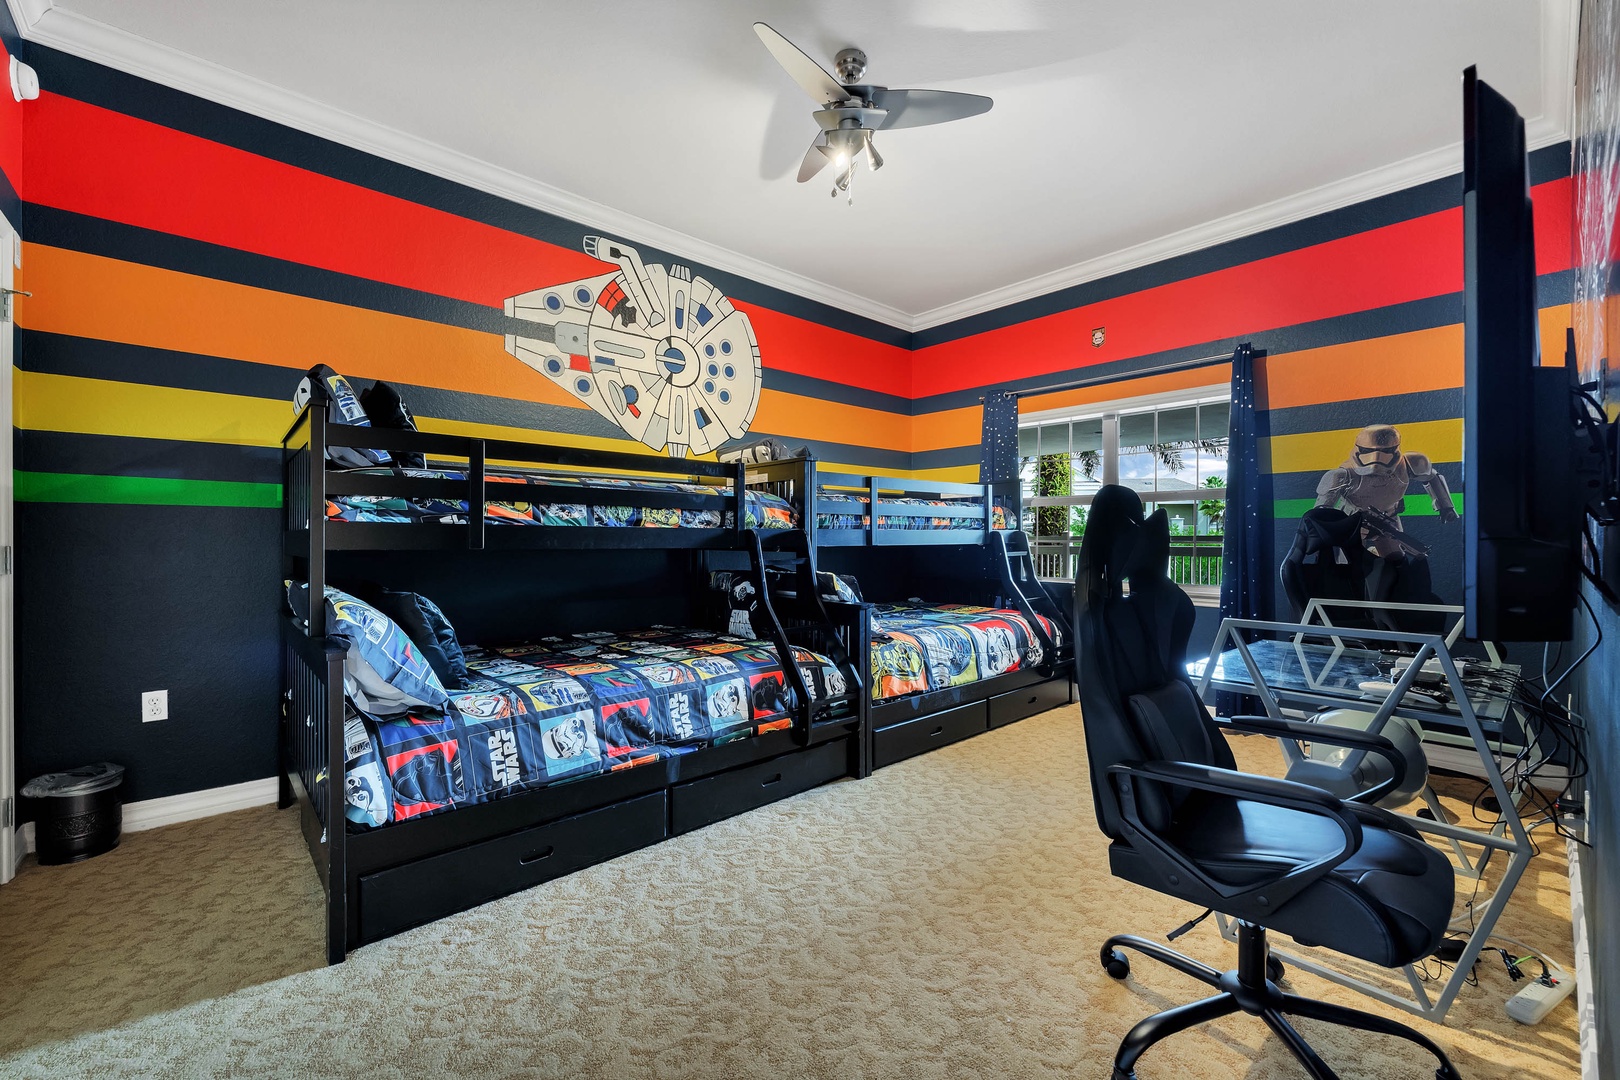 Star Wars themed bed/game room